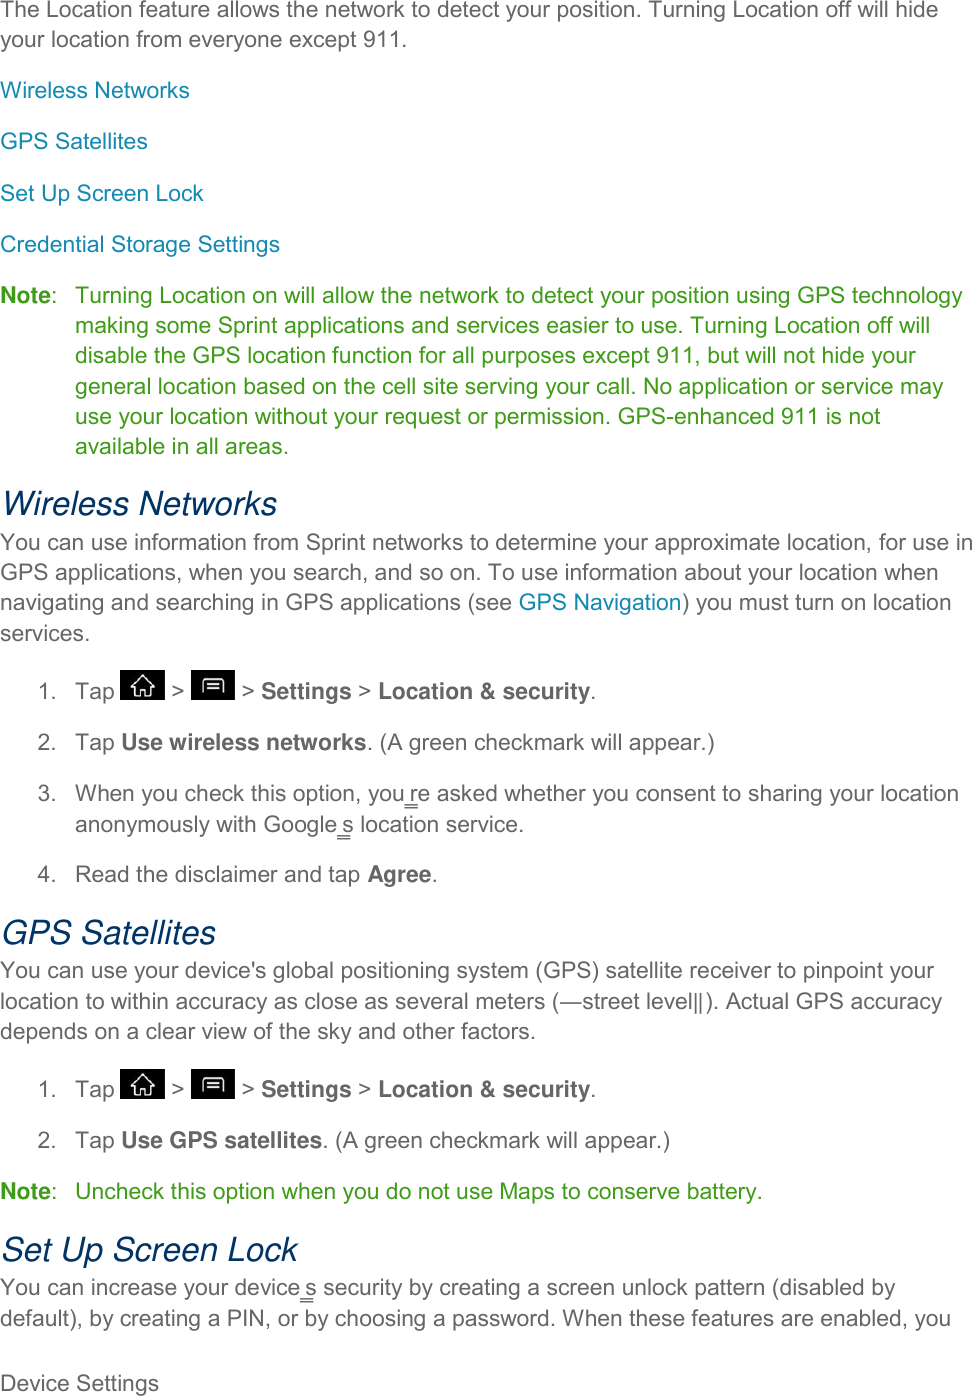 Device Settings     The Location feature allows the network to detect your position. Turning Location off will hide your location from everyone except 911. Wireless Networks GPS Satellites Set Up Screen Lock Credential Storage Settings Note:   Turning Location on will allow the network to detect your position using GPS technology making some Sprint applications and services easier to use. Turning Location off will disable the GPS location function for all purposes except 911, but will not hide your general location based on the cell site serving your call. No application or service may use your location without your request or permission. GPS-enhanced 911 is not available in all areas. Wireless Networks You can use information from Sprint networks to determine your approximate location, for use in GPS applications, when you search, and so on. To use information about your location when navigating and searching in GPS applications (see GPS Navigation) you must turn on location services. 1.  Tap   &gt;   &gt; Settings &gt; Location &amp; security. 2.  Tap Use wireless networks. (A green checkmark will appear.) 3.  When you check this option, you‗re asked whether you consent to sharing your location anonymously with Google‗s location service. 4.  Read the disclaimer and tap Agree. GPS Satellites You can use your device&apos;s global positioning system (GPS) satellite receiver to pinpoint your location to within accuracy as close as several meters (―street level‖). Actual GPS accuracy depends on a clear view of the sky and other factors. 1.  Tap   &gt;   &gt; Settings &gt; Location &amp; security. 2.  Tap Use GPS satellites. (A green checkmark will appear.) Note:   Uncheck this option when you do not use Maps to conserve battery. Set Up Screen Lock You can increase your device‗s security by creating a screen unlock pattern (disabled by default), by creating a PIN, or by choosing a password. When these features are enabled, you 